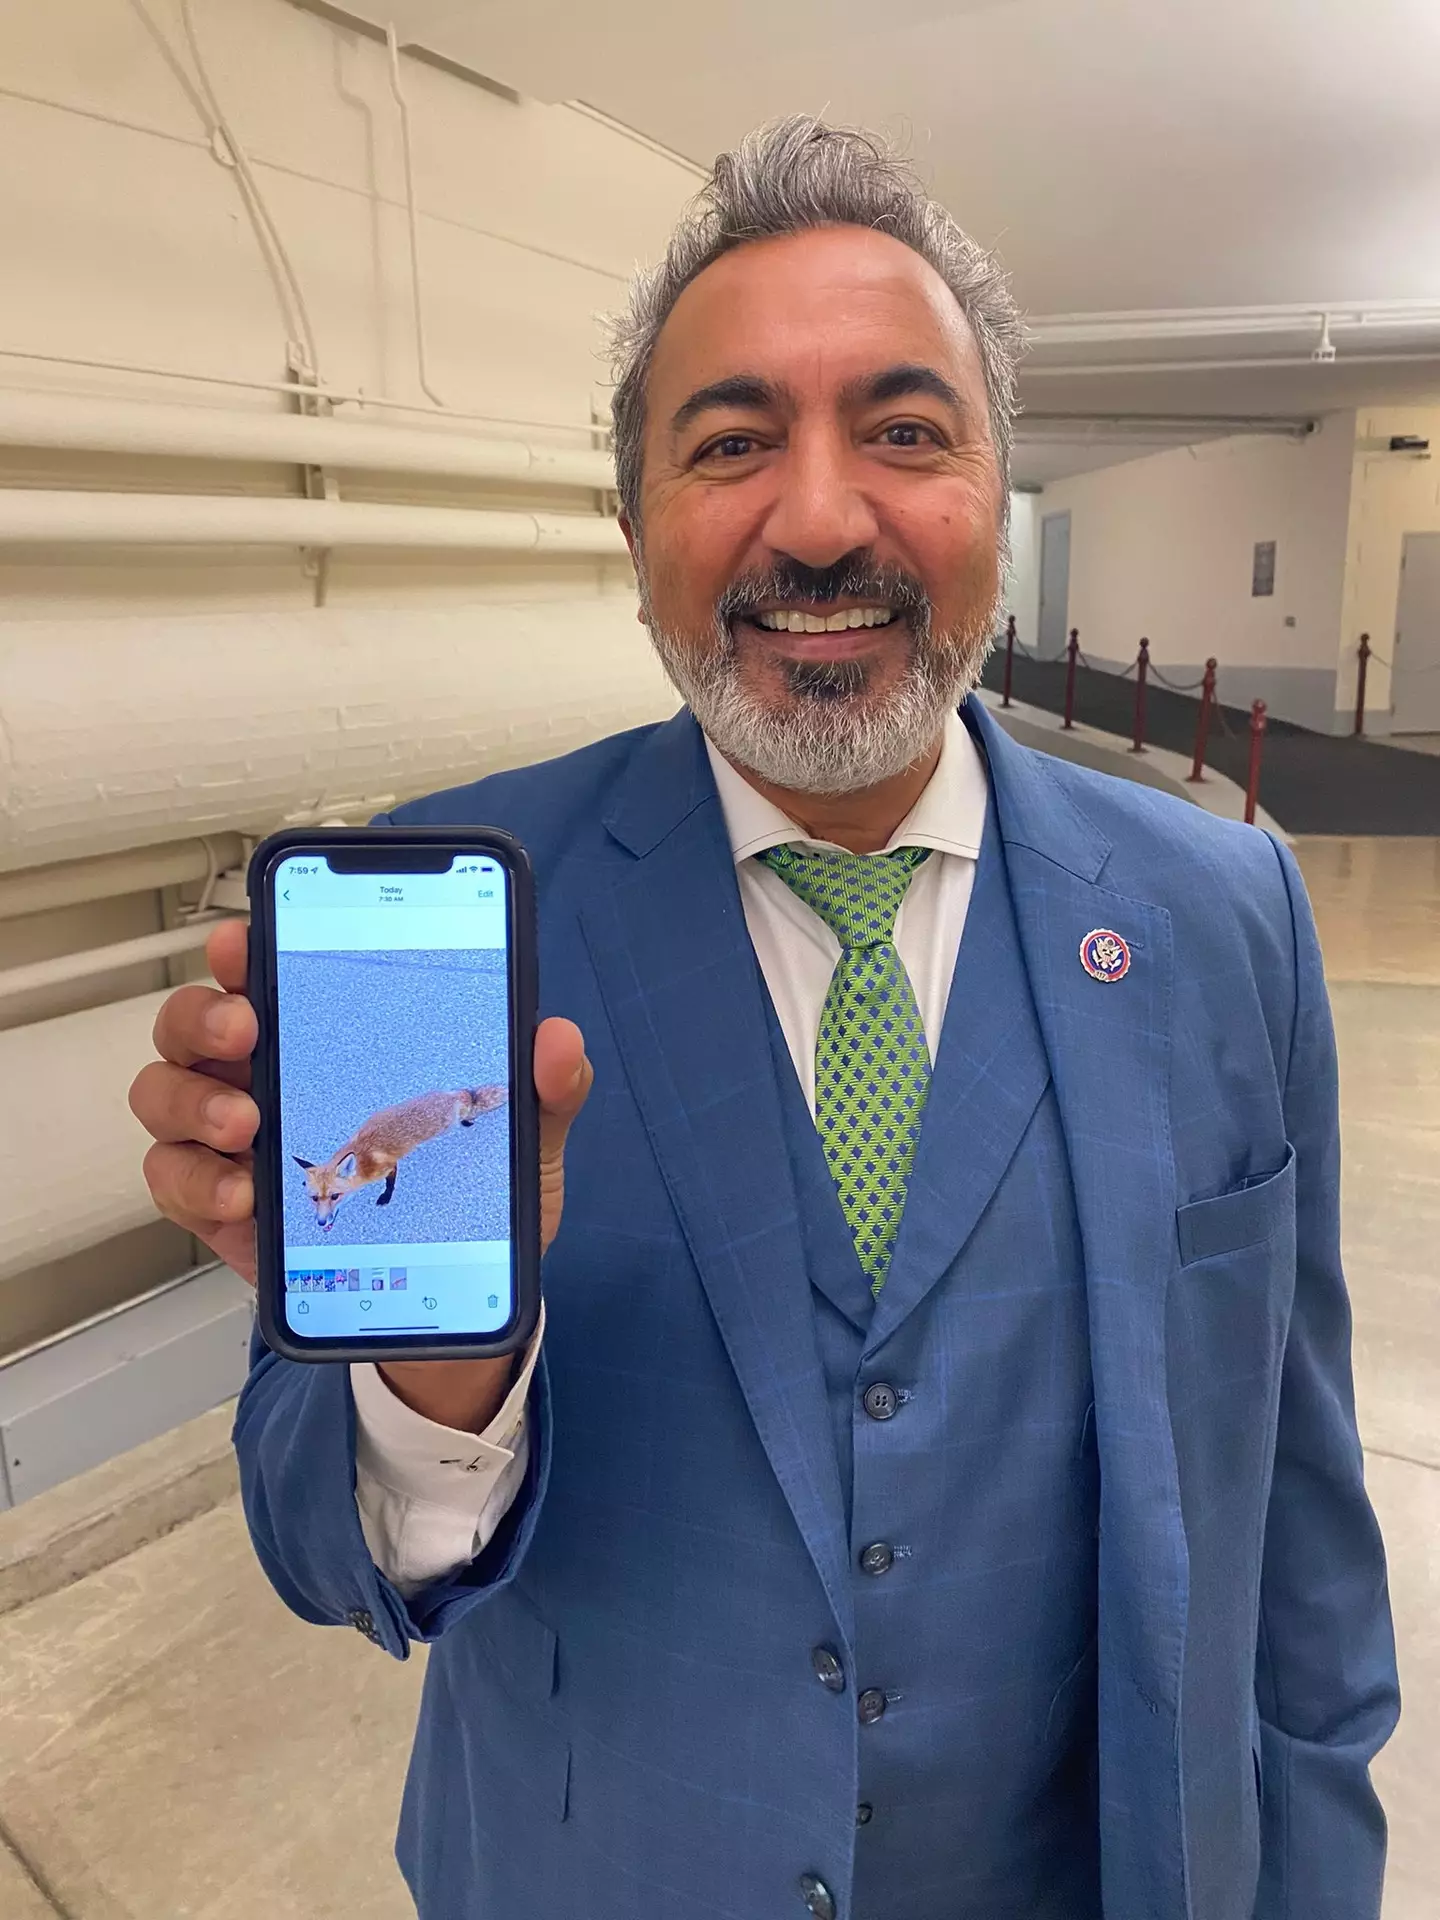 Representative Bera was one of the people bitten by the fox.